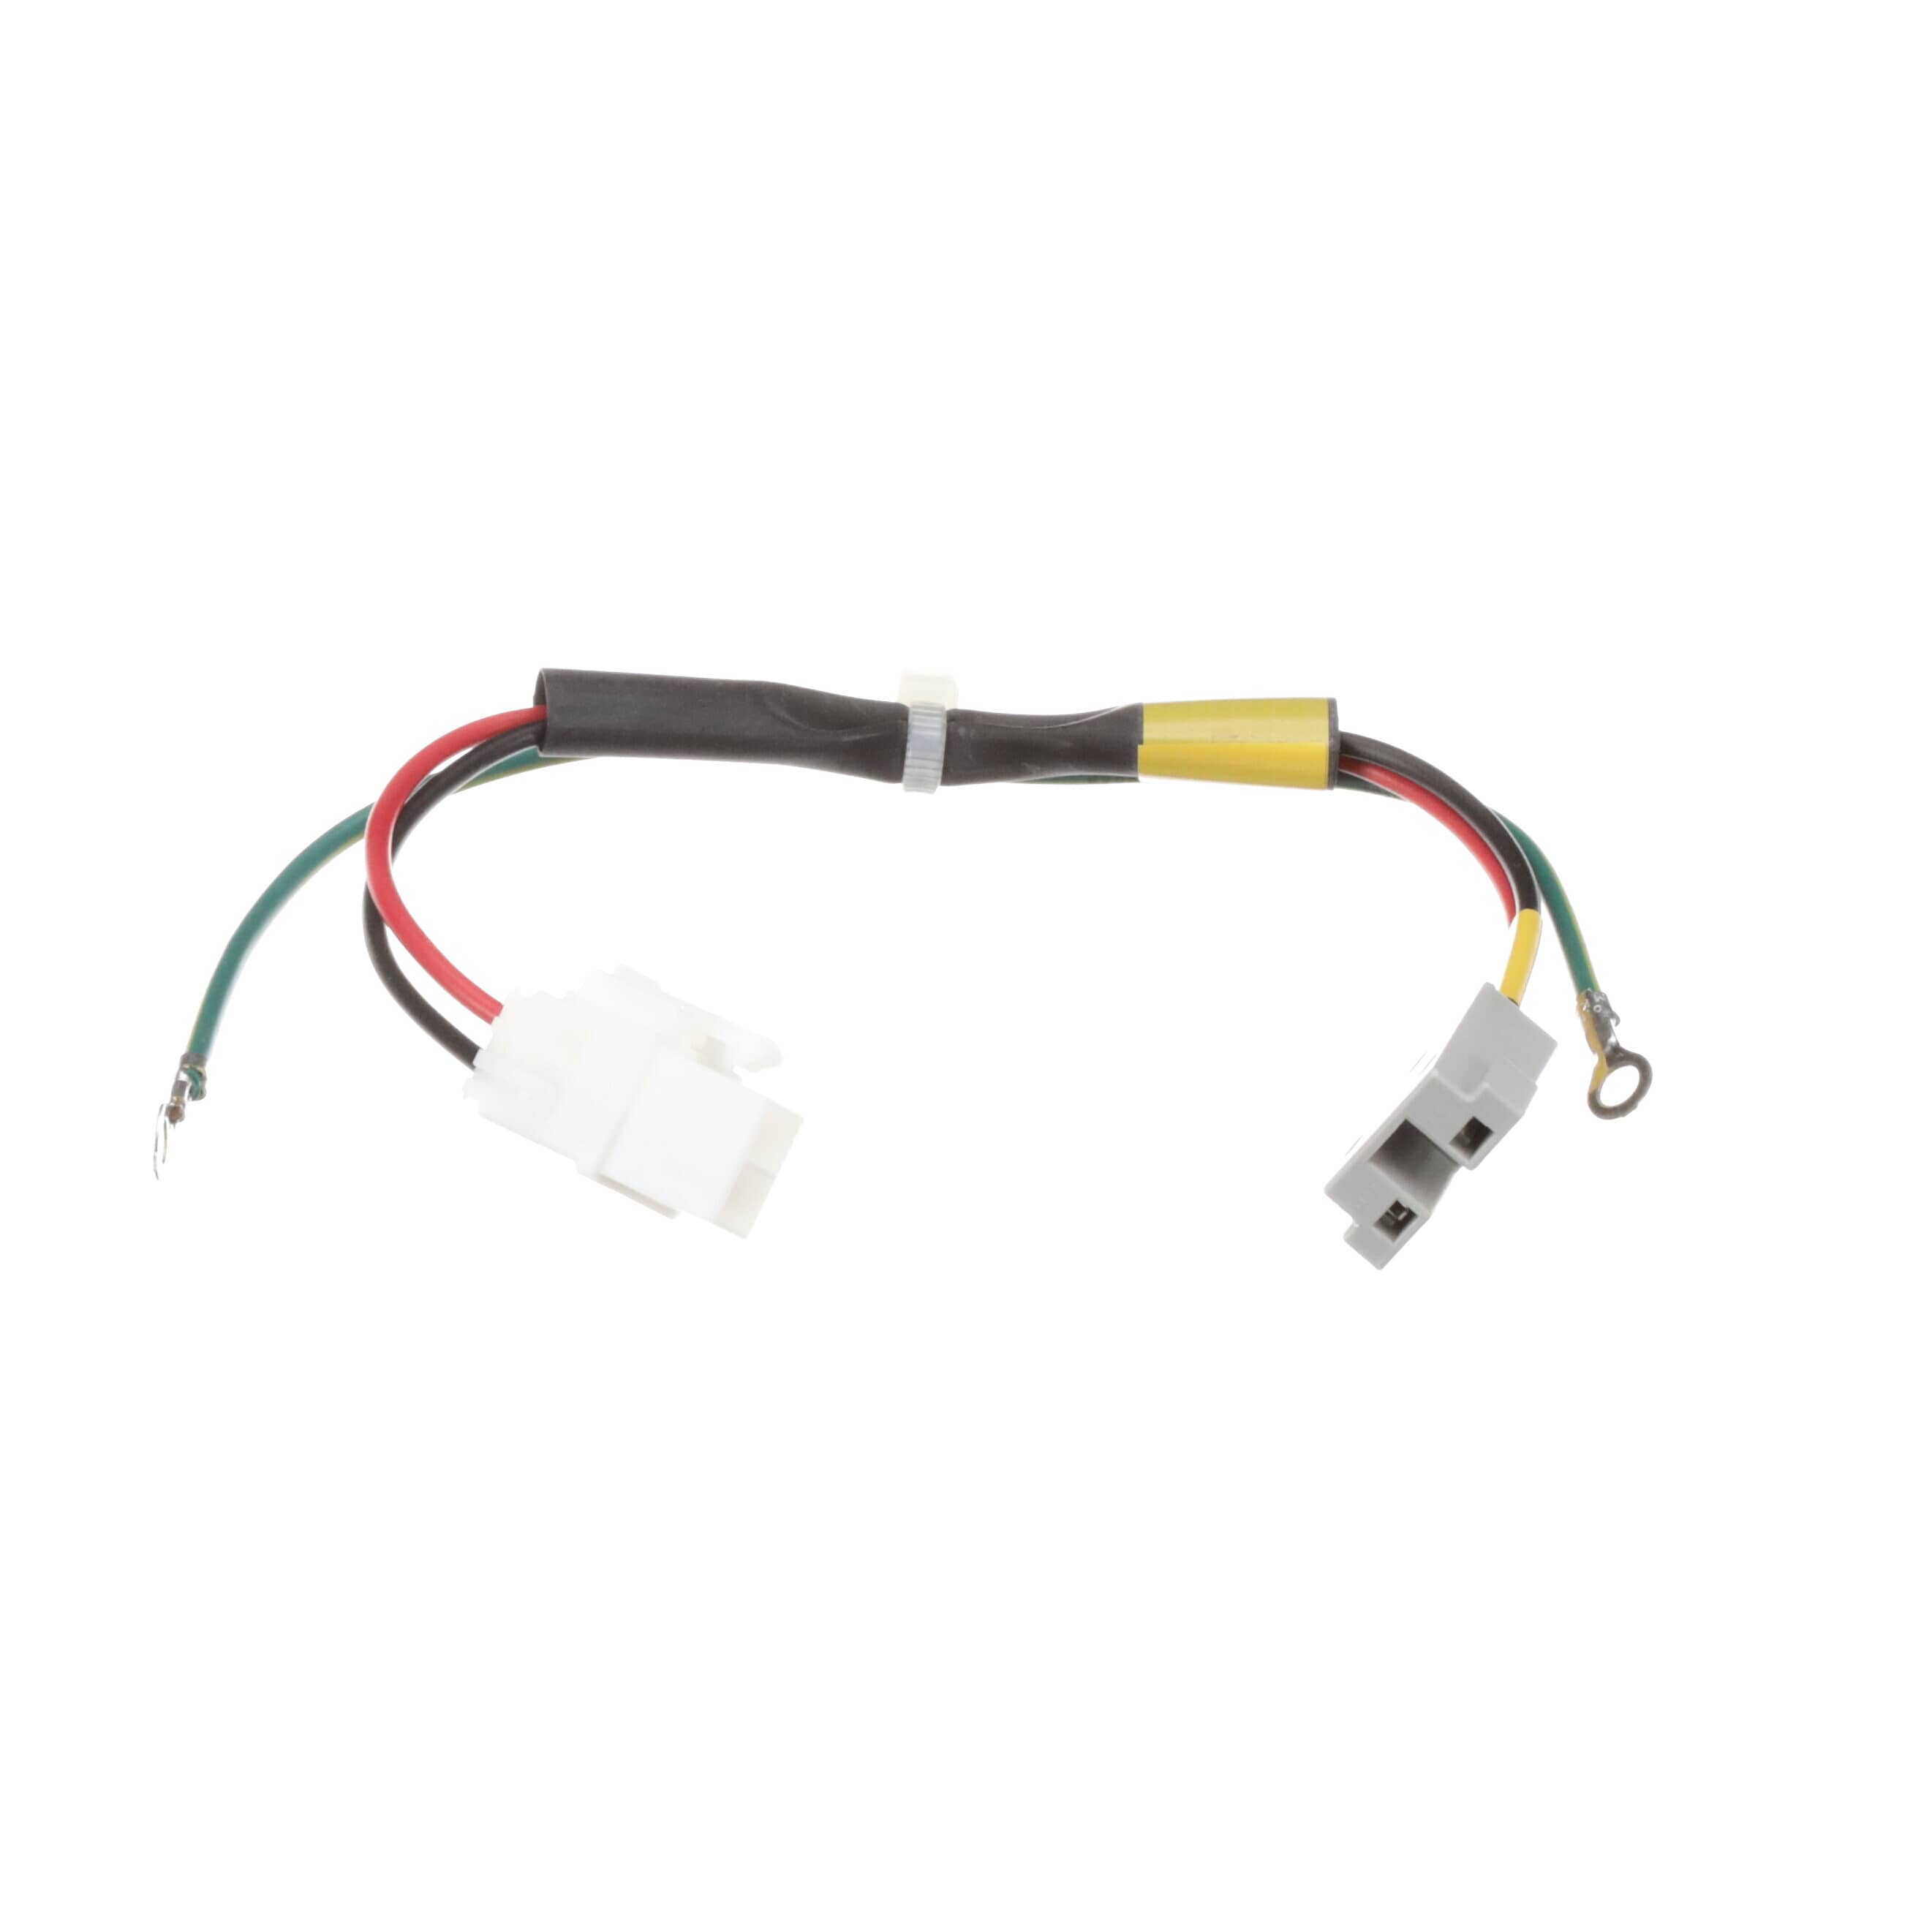 LG EAD64168628 Harness Assembly